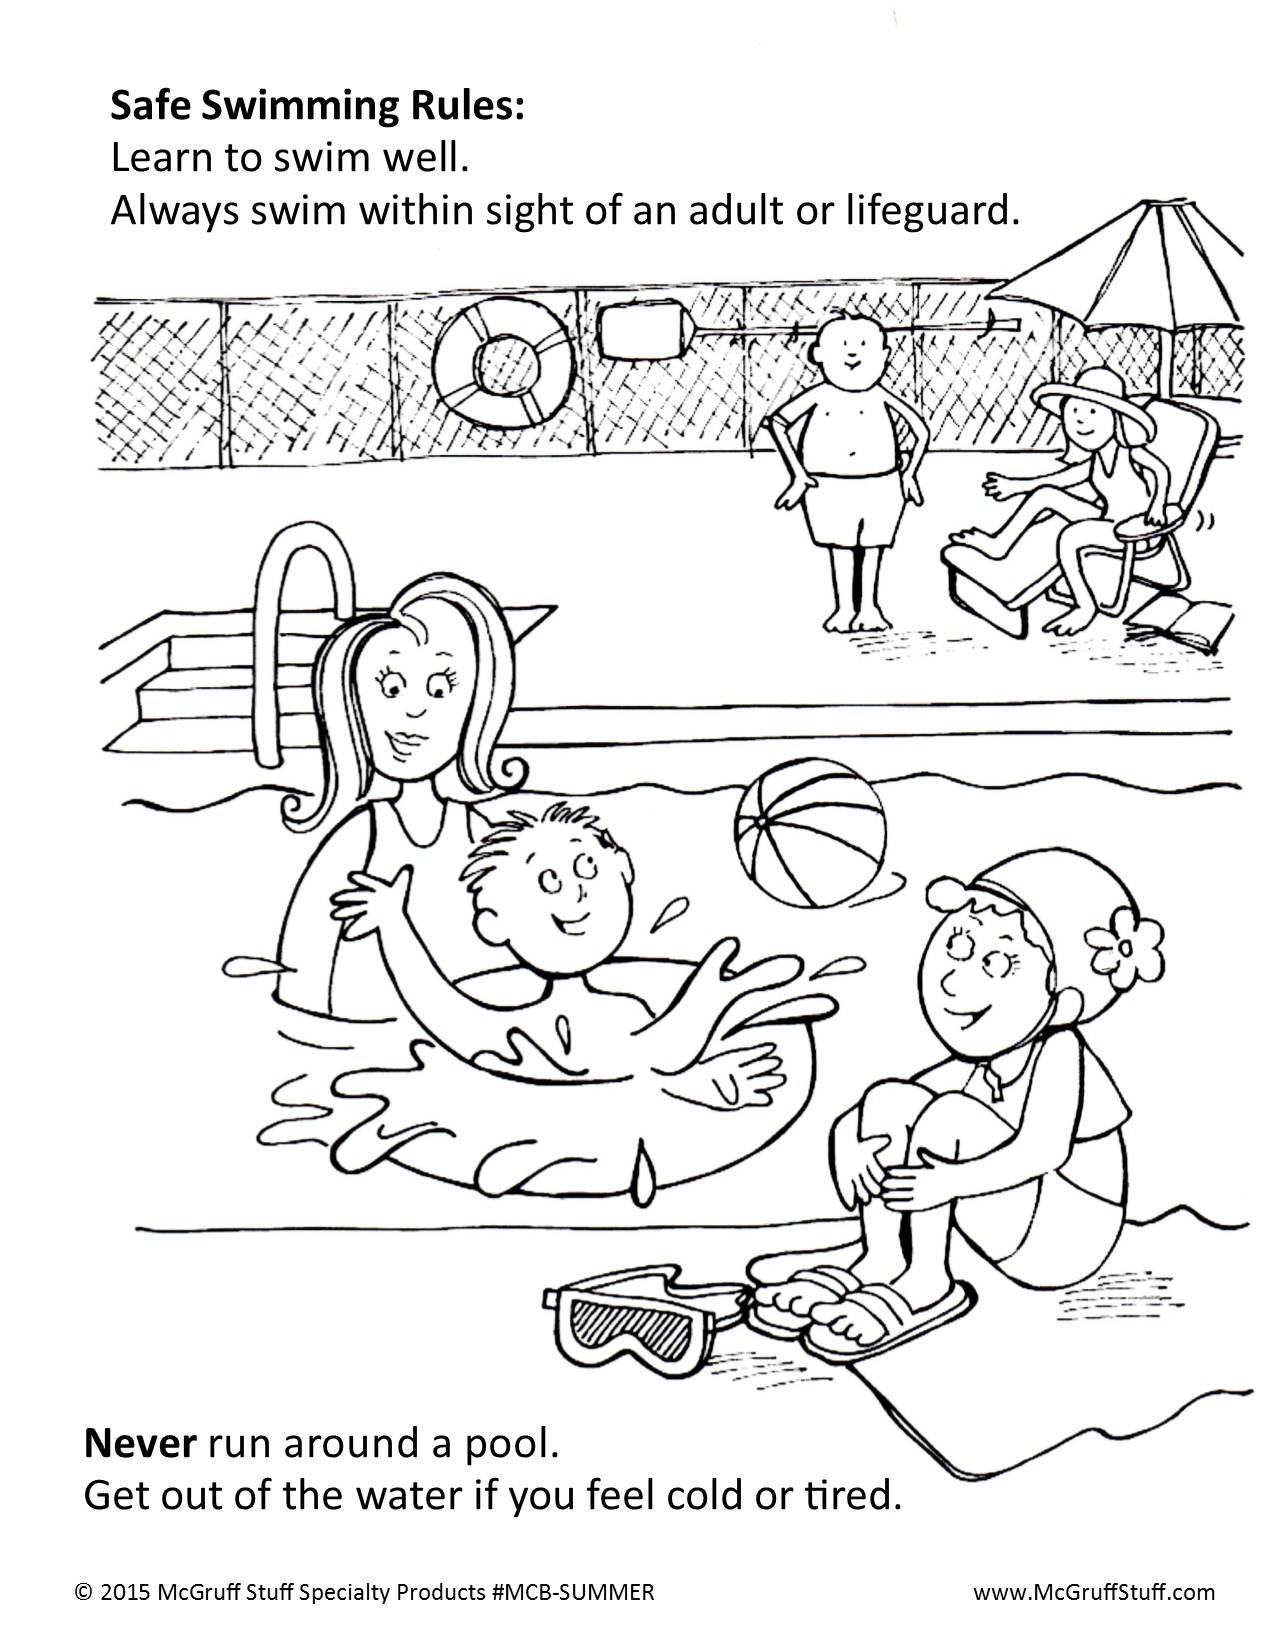 Summer Safety Coloring Pages Summer Safety Coloring Book A K B